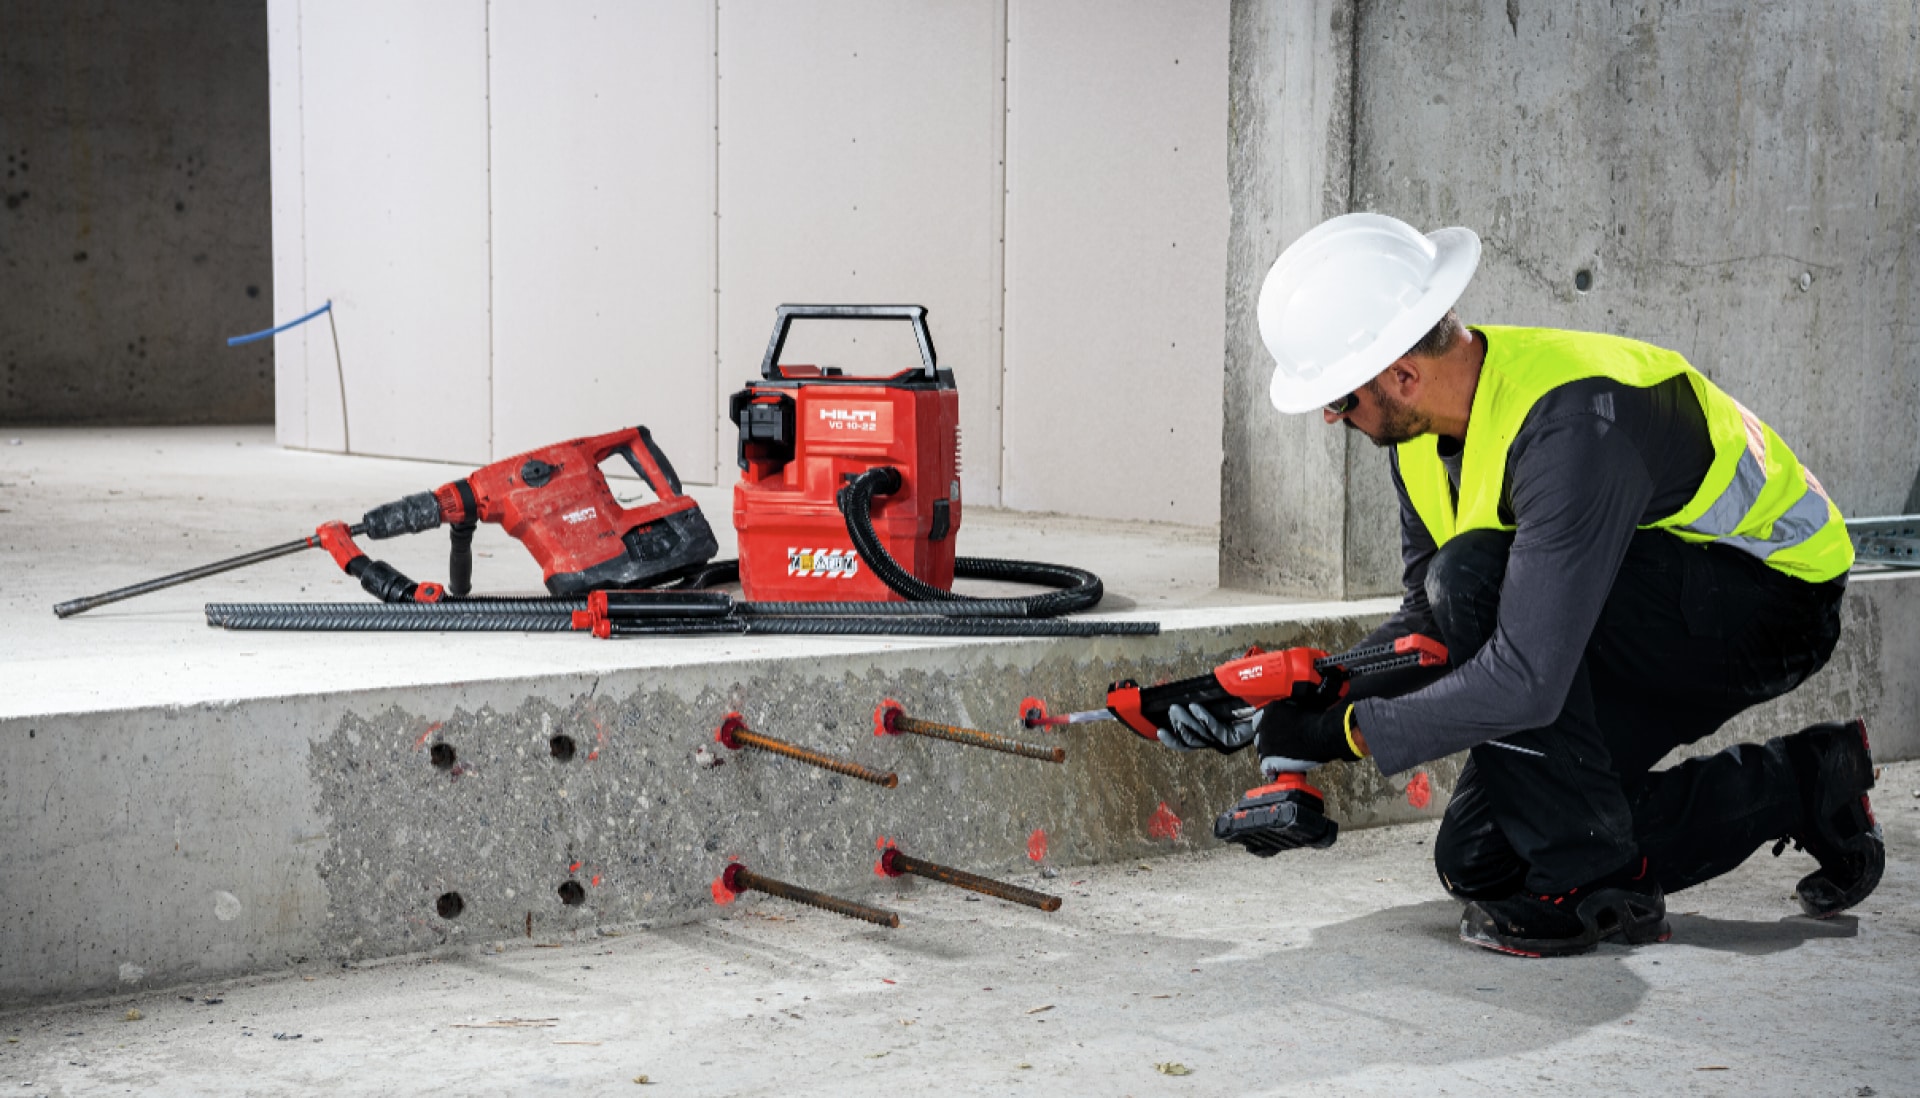 HIT-HY 200-R V3- rebar installation with the HDE 500-A22 chemical anchor dispenser